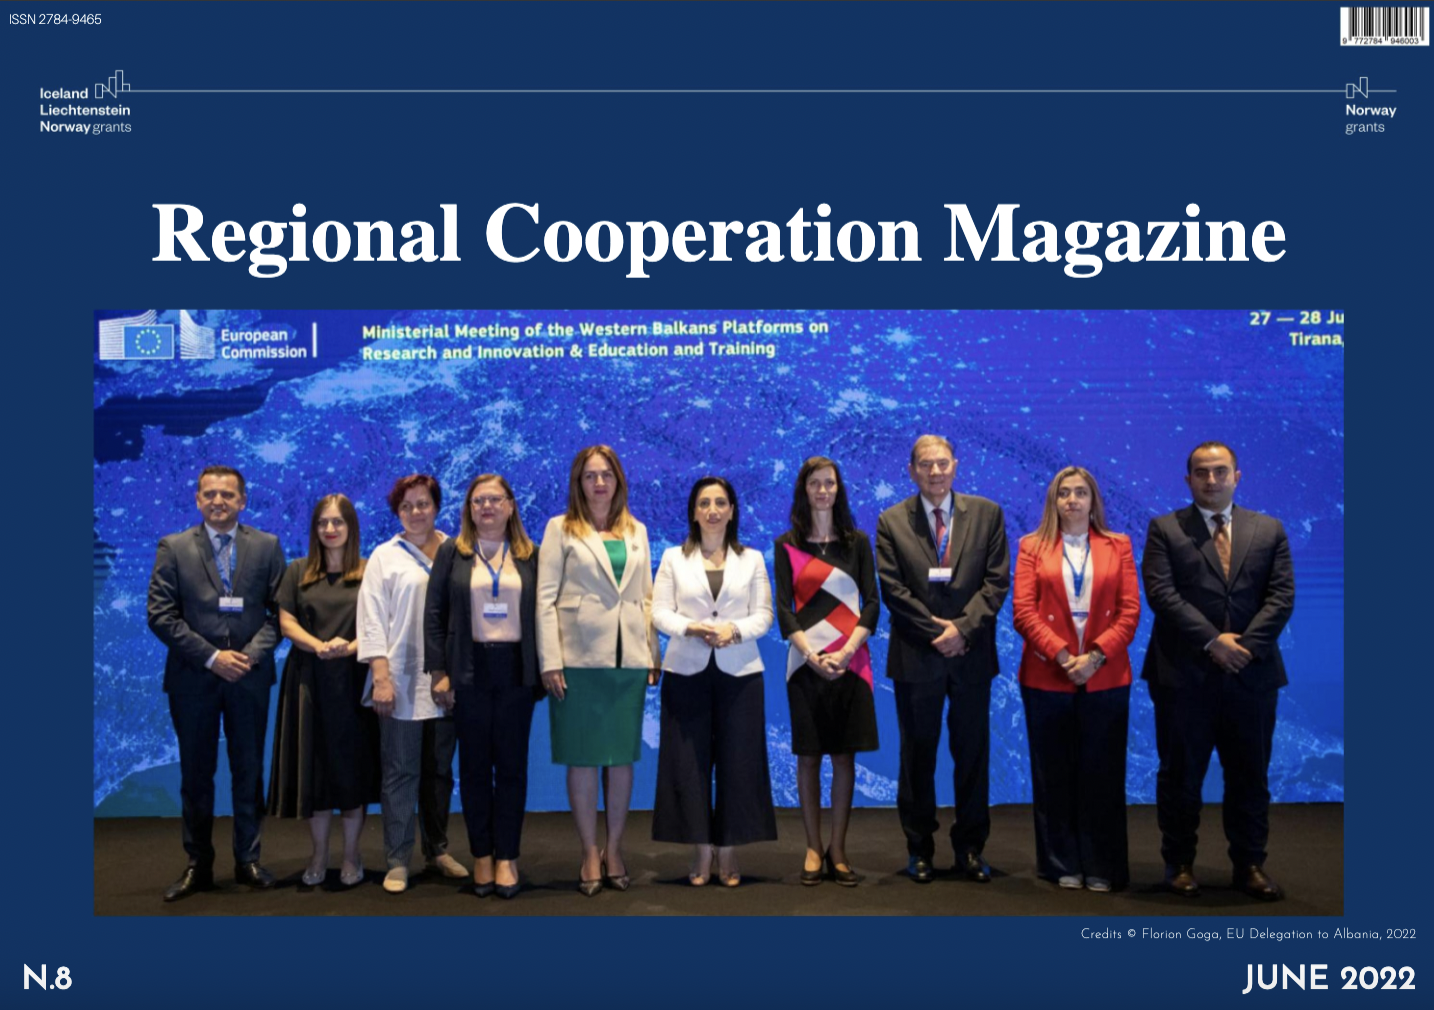  The 8th issue of the Regional Cooperation Online Magazine is now out!